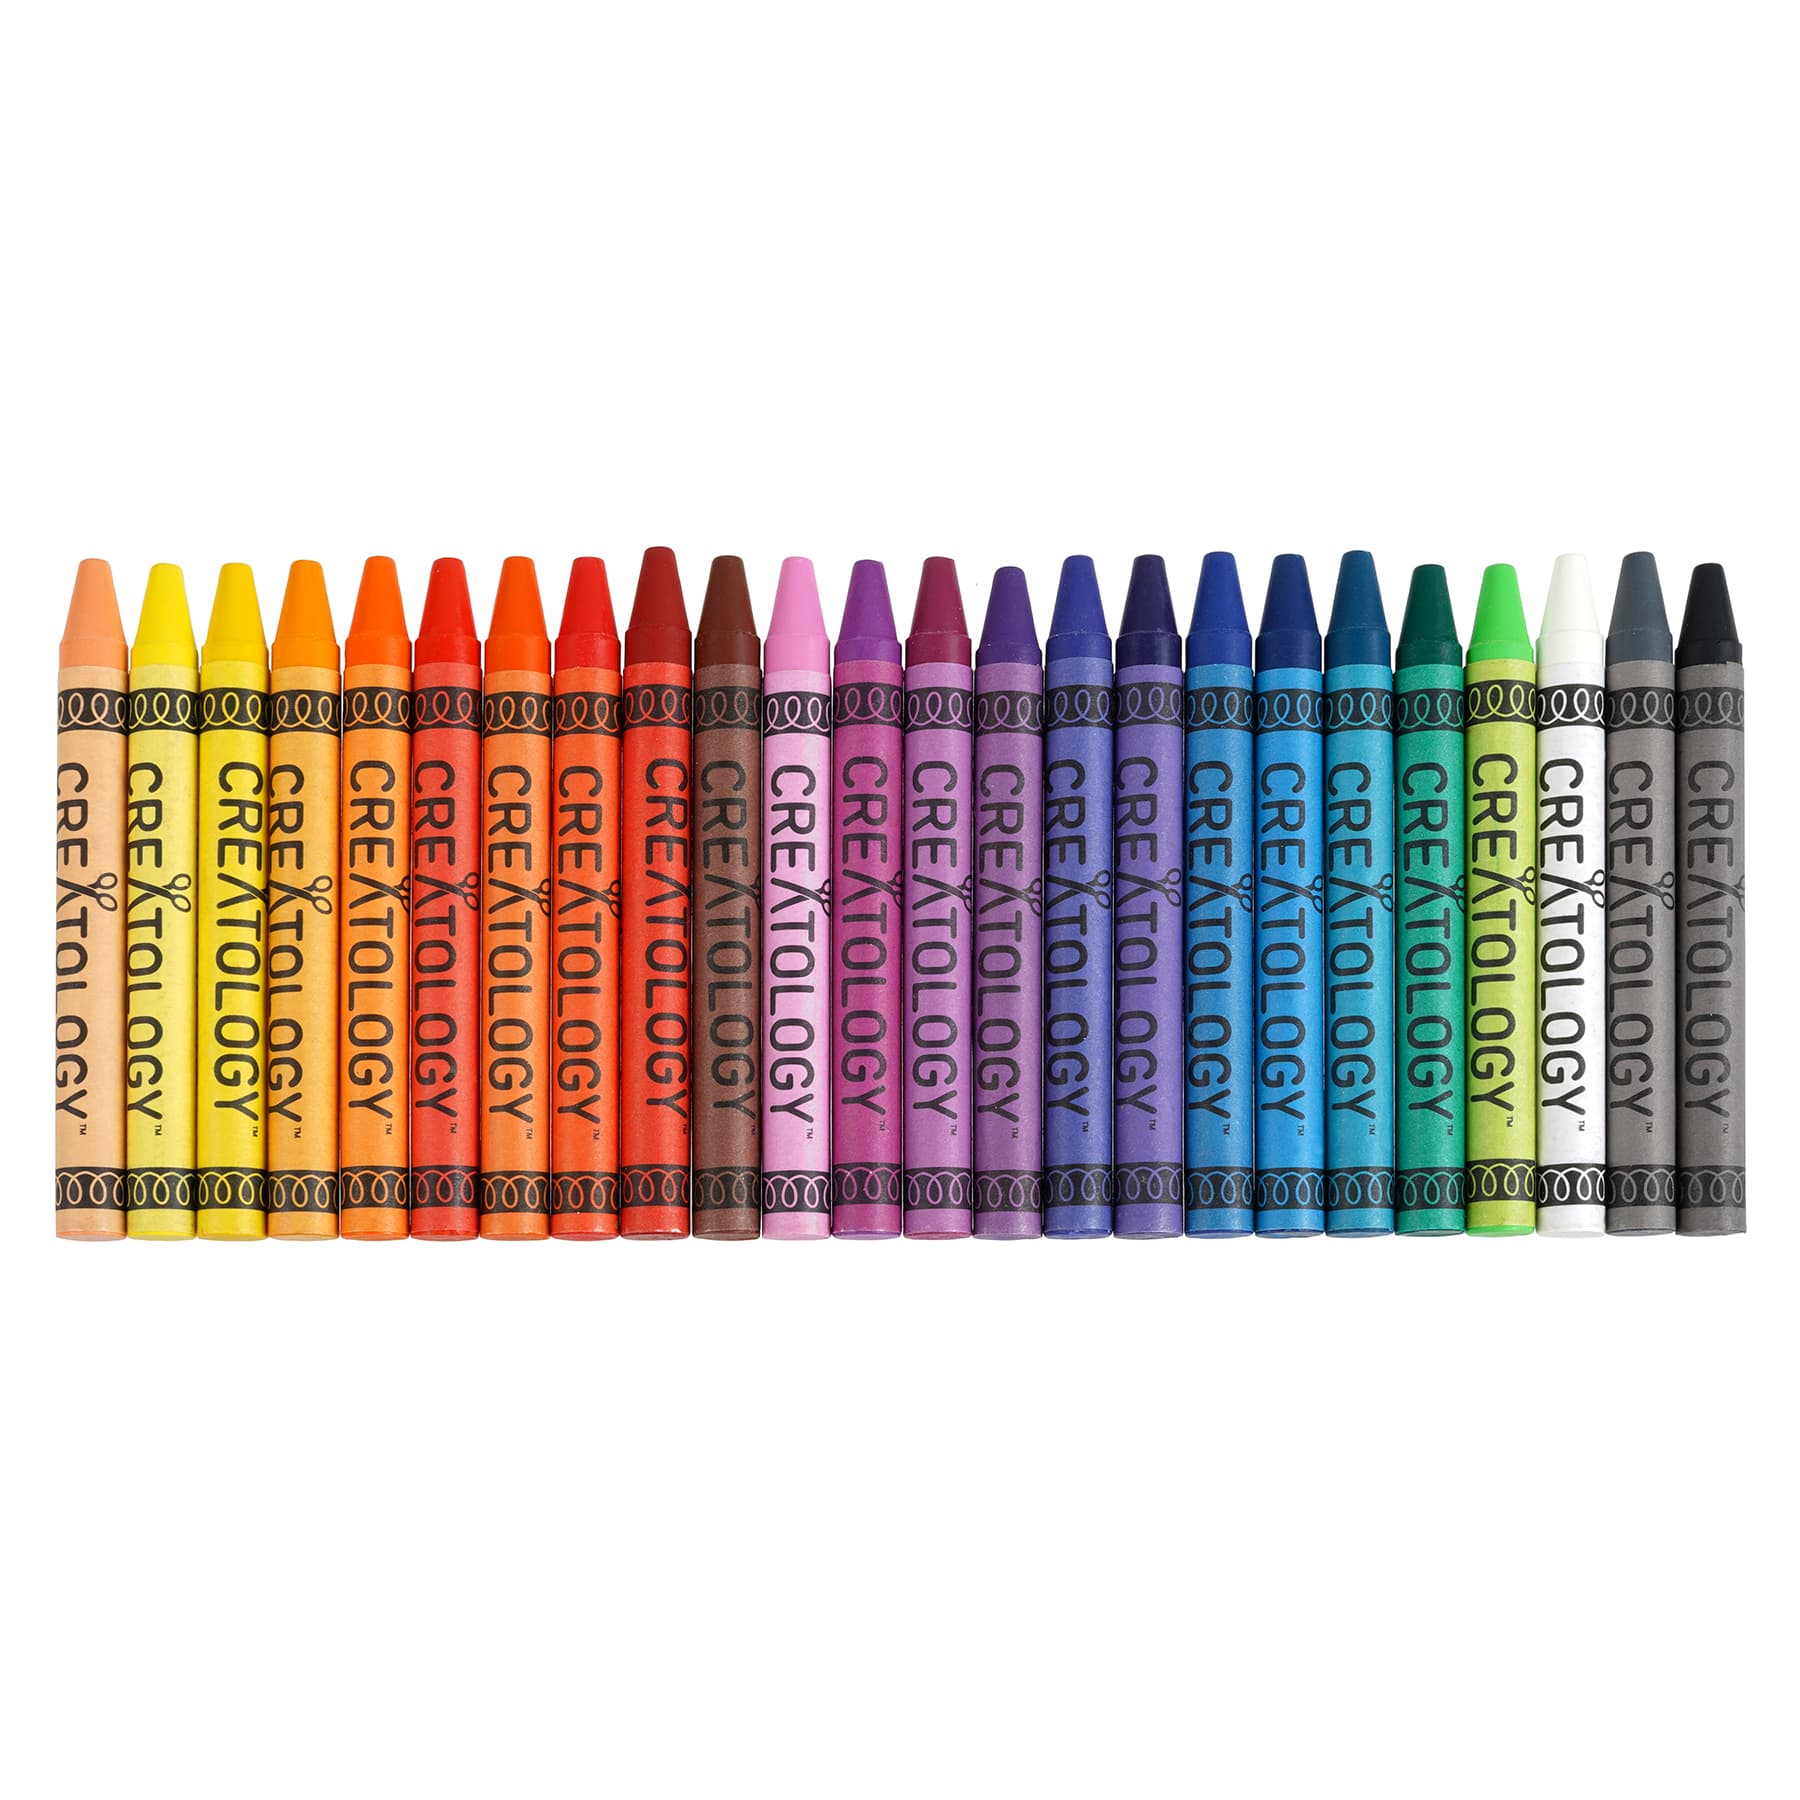 Crayons, 24ct. by Creatology™ | Michaels